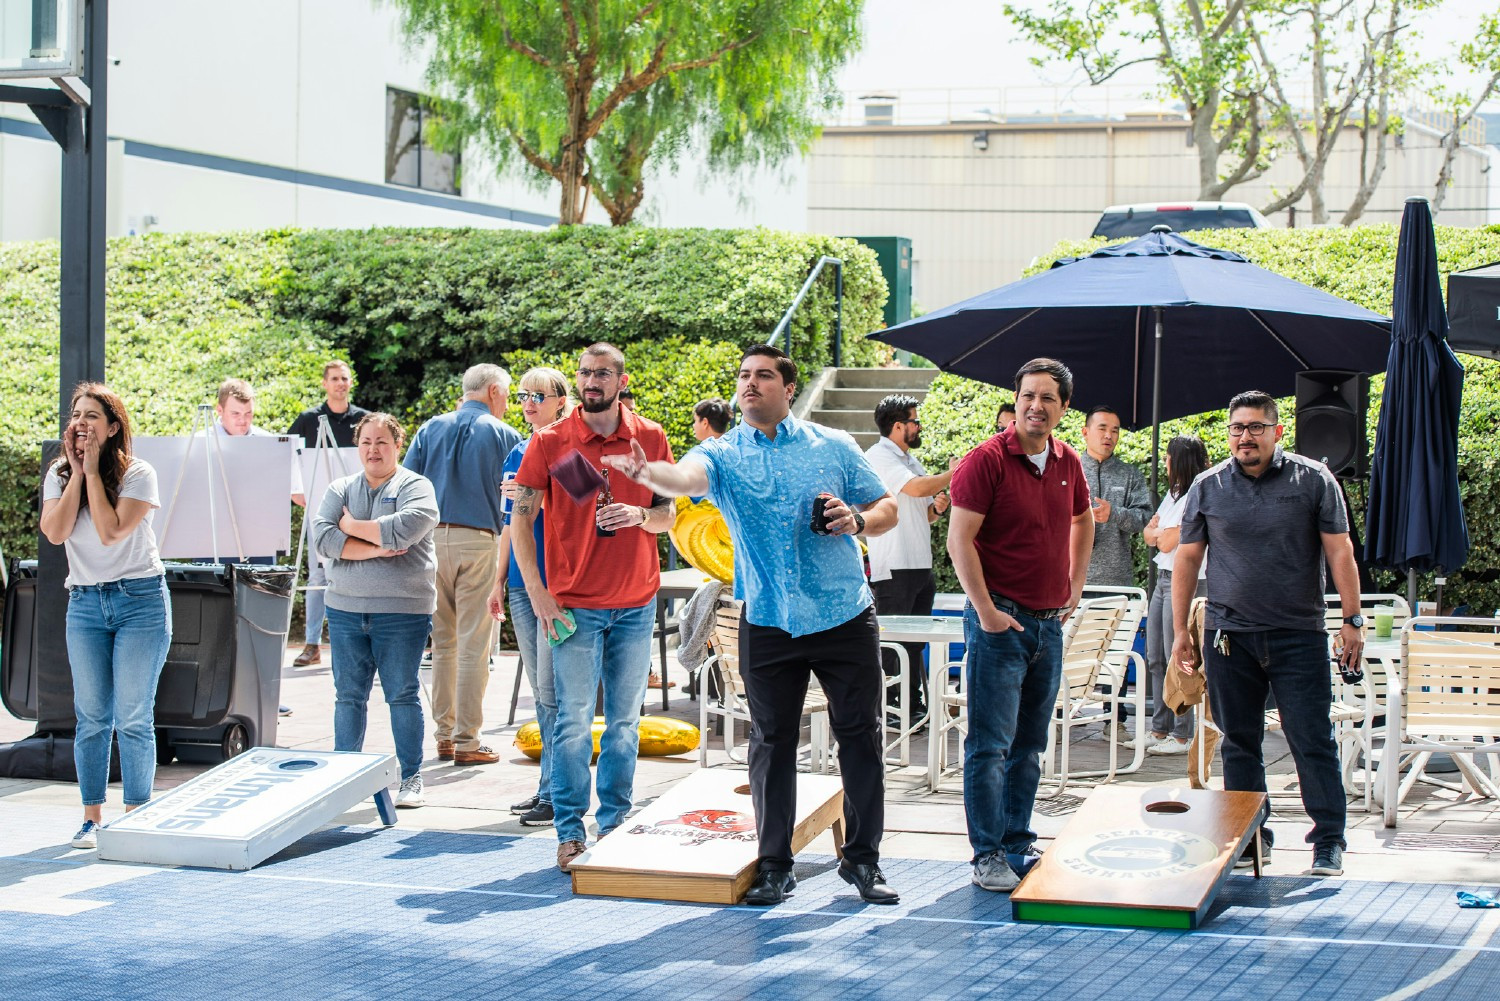 Summer lunches and corn hole tournaments at our HQ office in Whittier